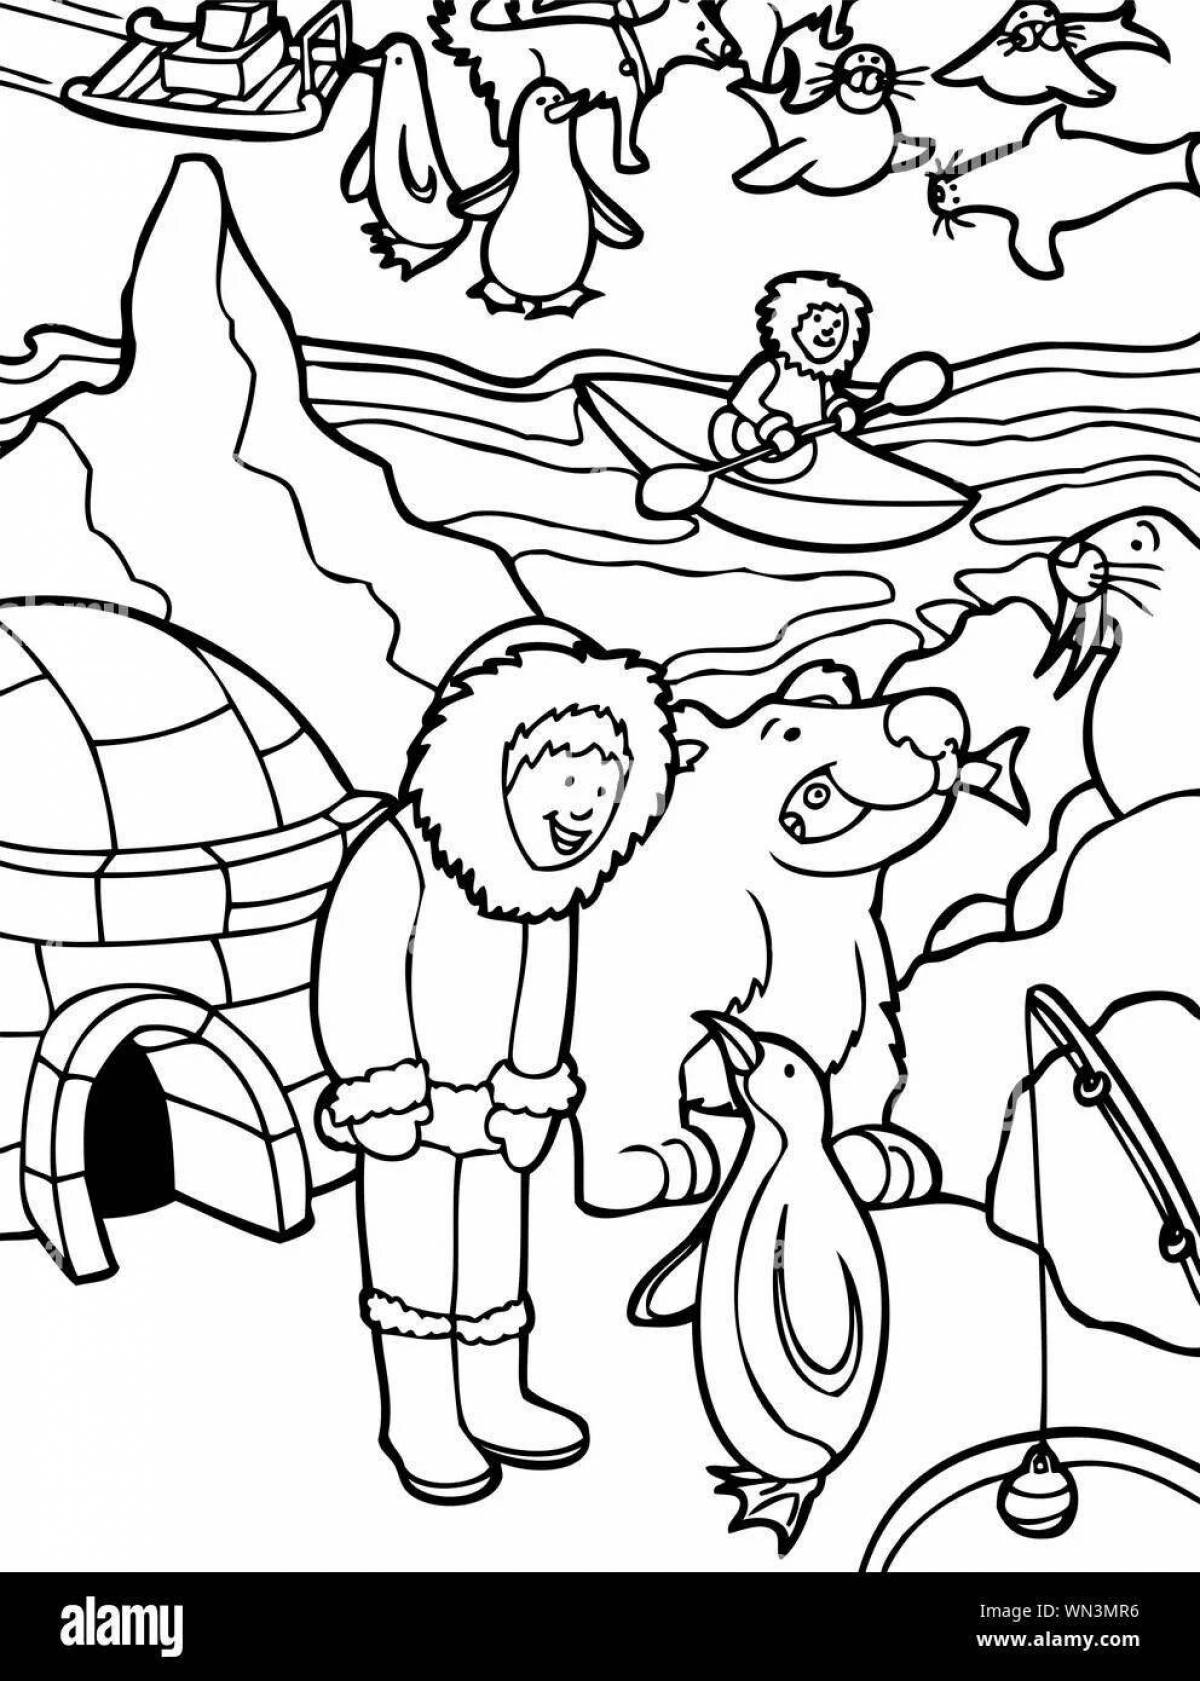 Amazing Nordic coloring pages